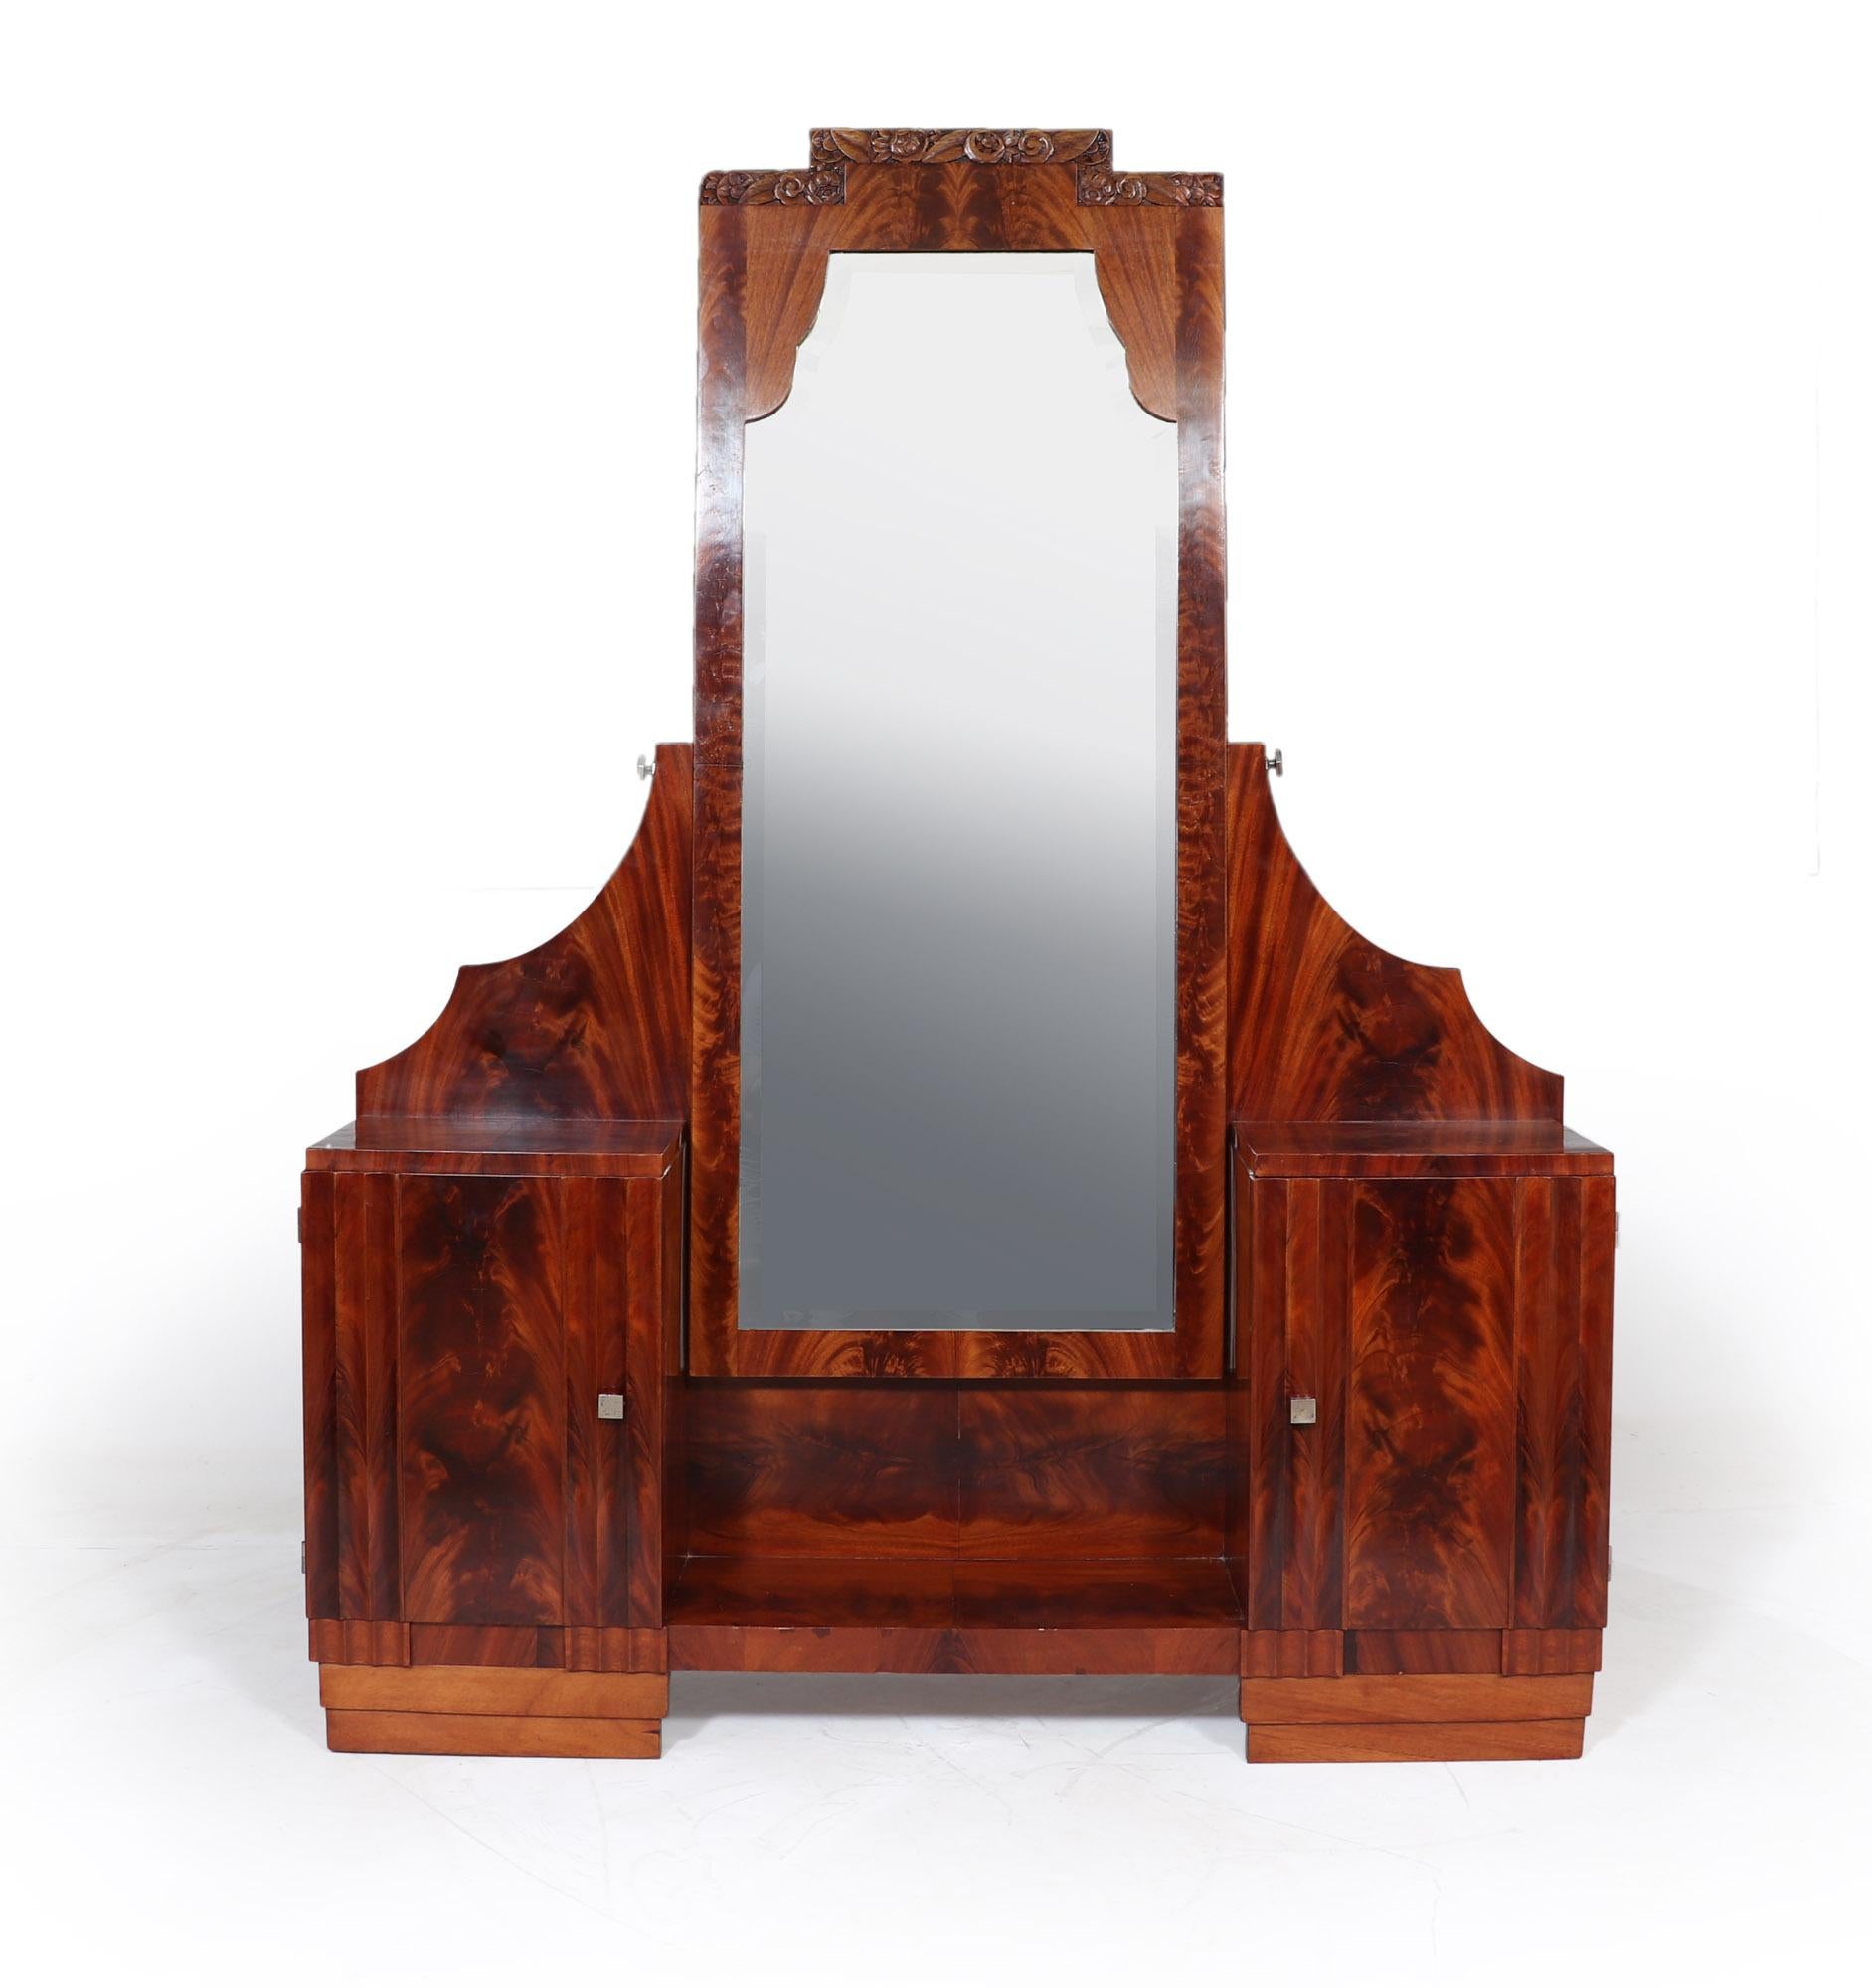 A French Art Deco dressing table in flame mahogany, with full length shaped top bevelled cheval mirror that is angle adjustable with silvered square knobs, two cabinets with single door and drawer behind the dressing table has been restored where